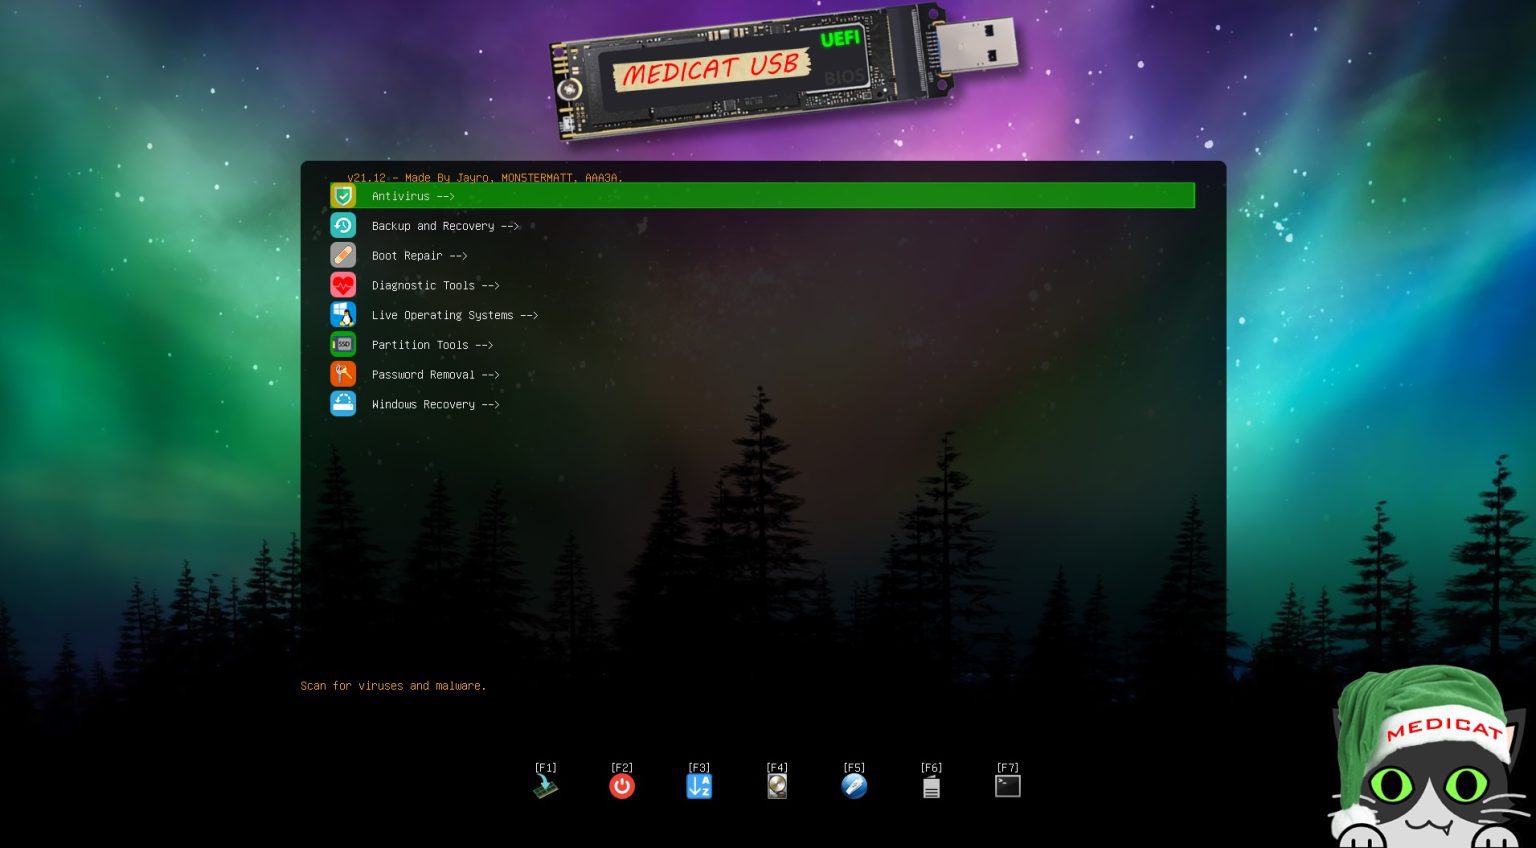 A computer screen displaying a green screen and the text "MediCat USB Installer".